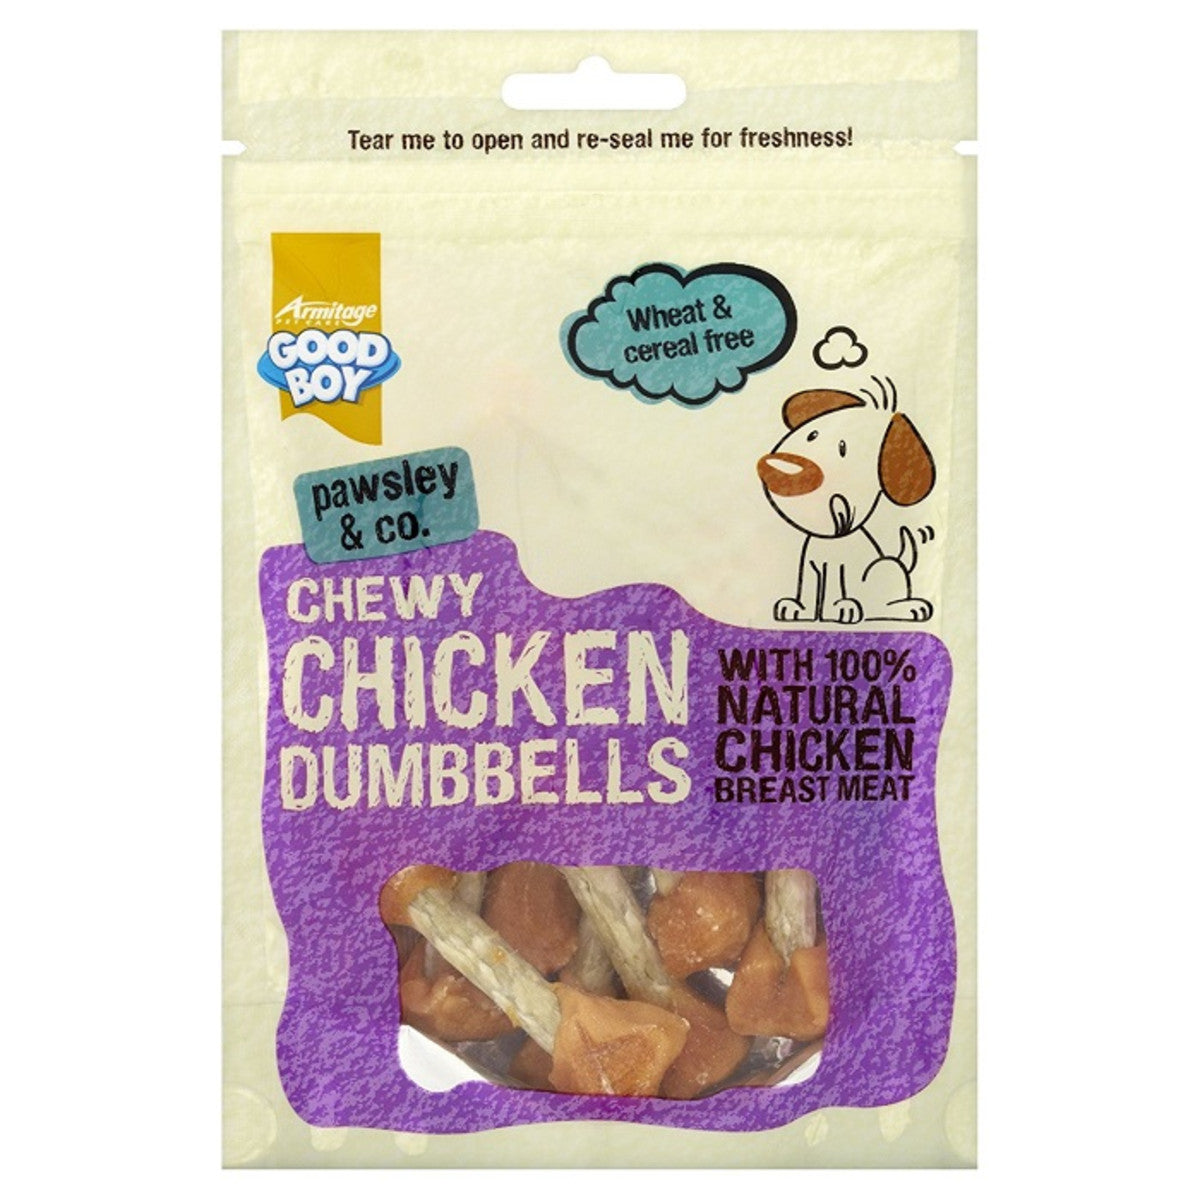 Good Boy Pawsley & Co Chewy Chicken Dumbbells